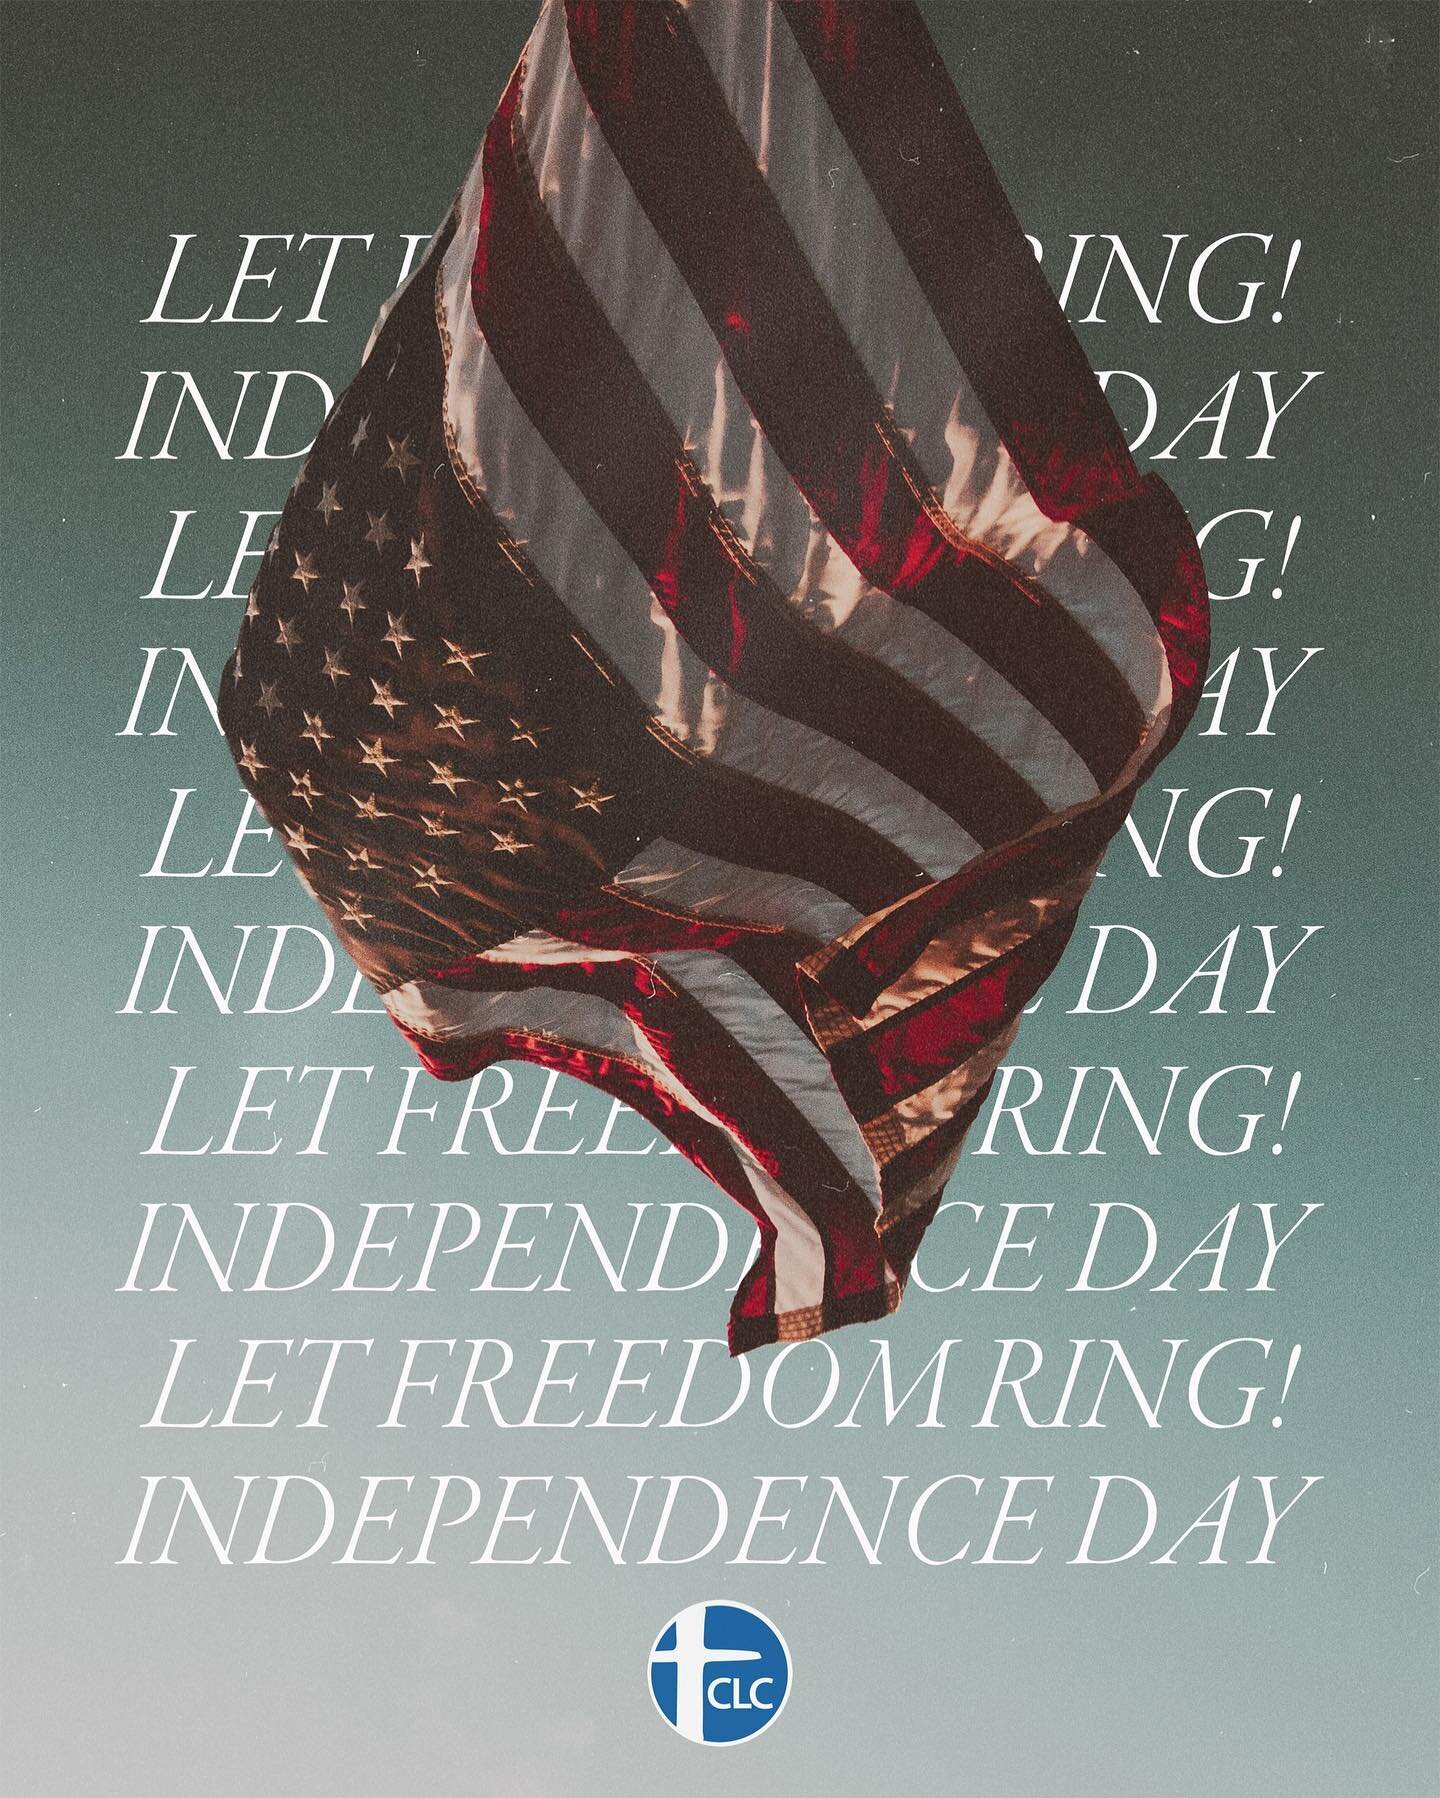 &ldquo;For the Lord is the Spirit, and wherever the Spirit of the Lord is, there is freedom.&rdquo;
‭‭2 Corinthians‬ ‭3‬:‭17‬ . ‬‬ Happy Independence Day! Pray everyone has a safe and blessed Fourth of July celebration! 🇺🇸🙏💒